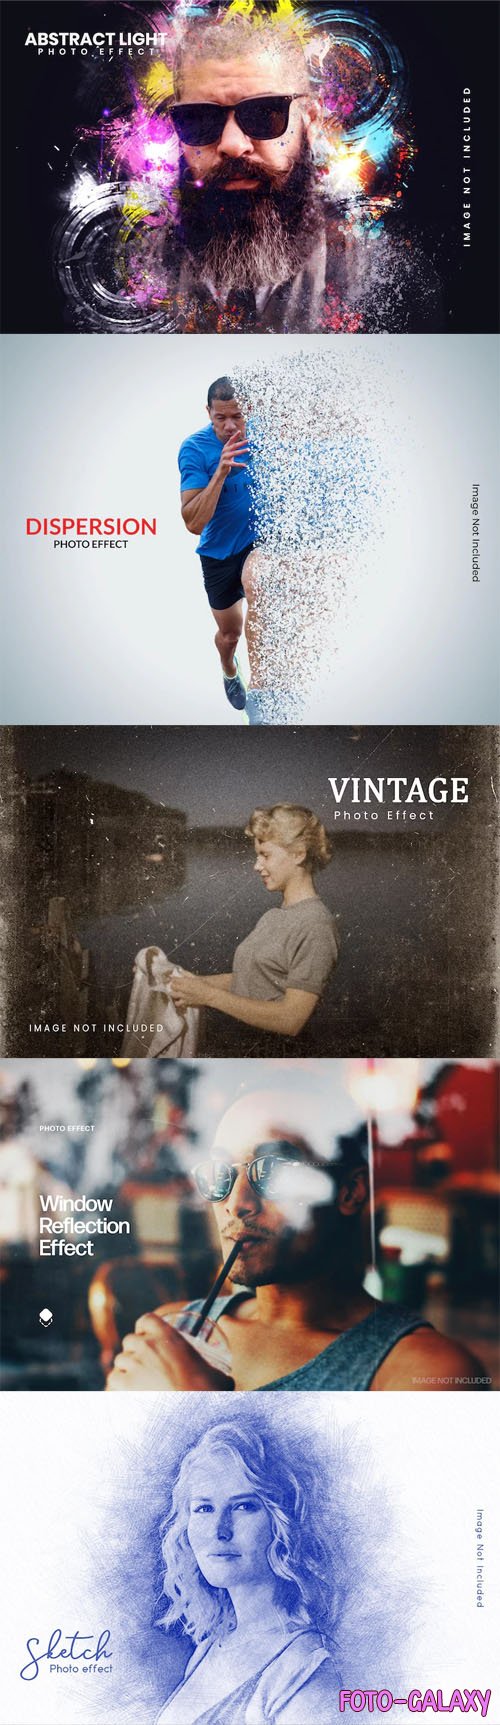 20 Awesome Premium Photo Effects for Photoshop [Vol.3]